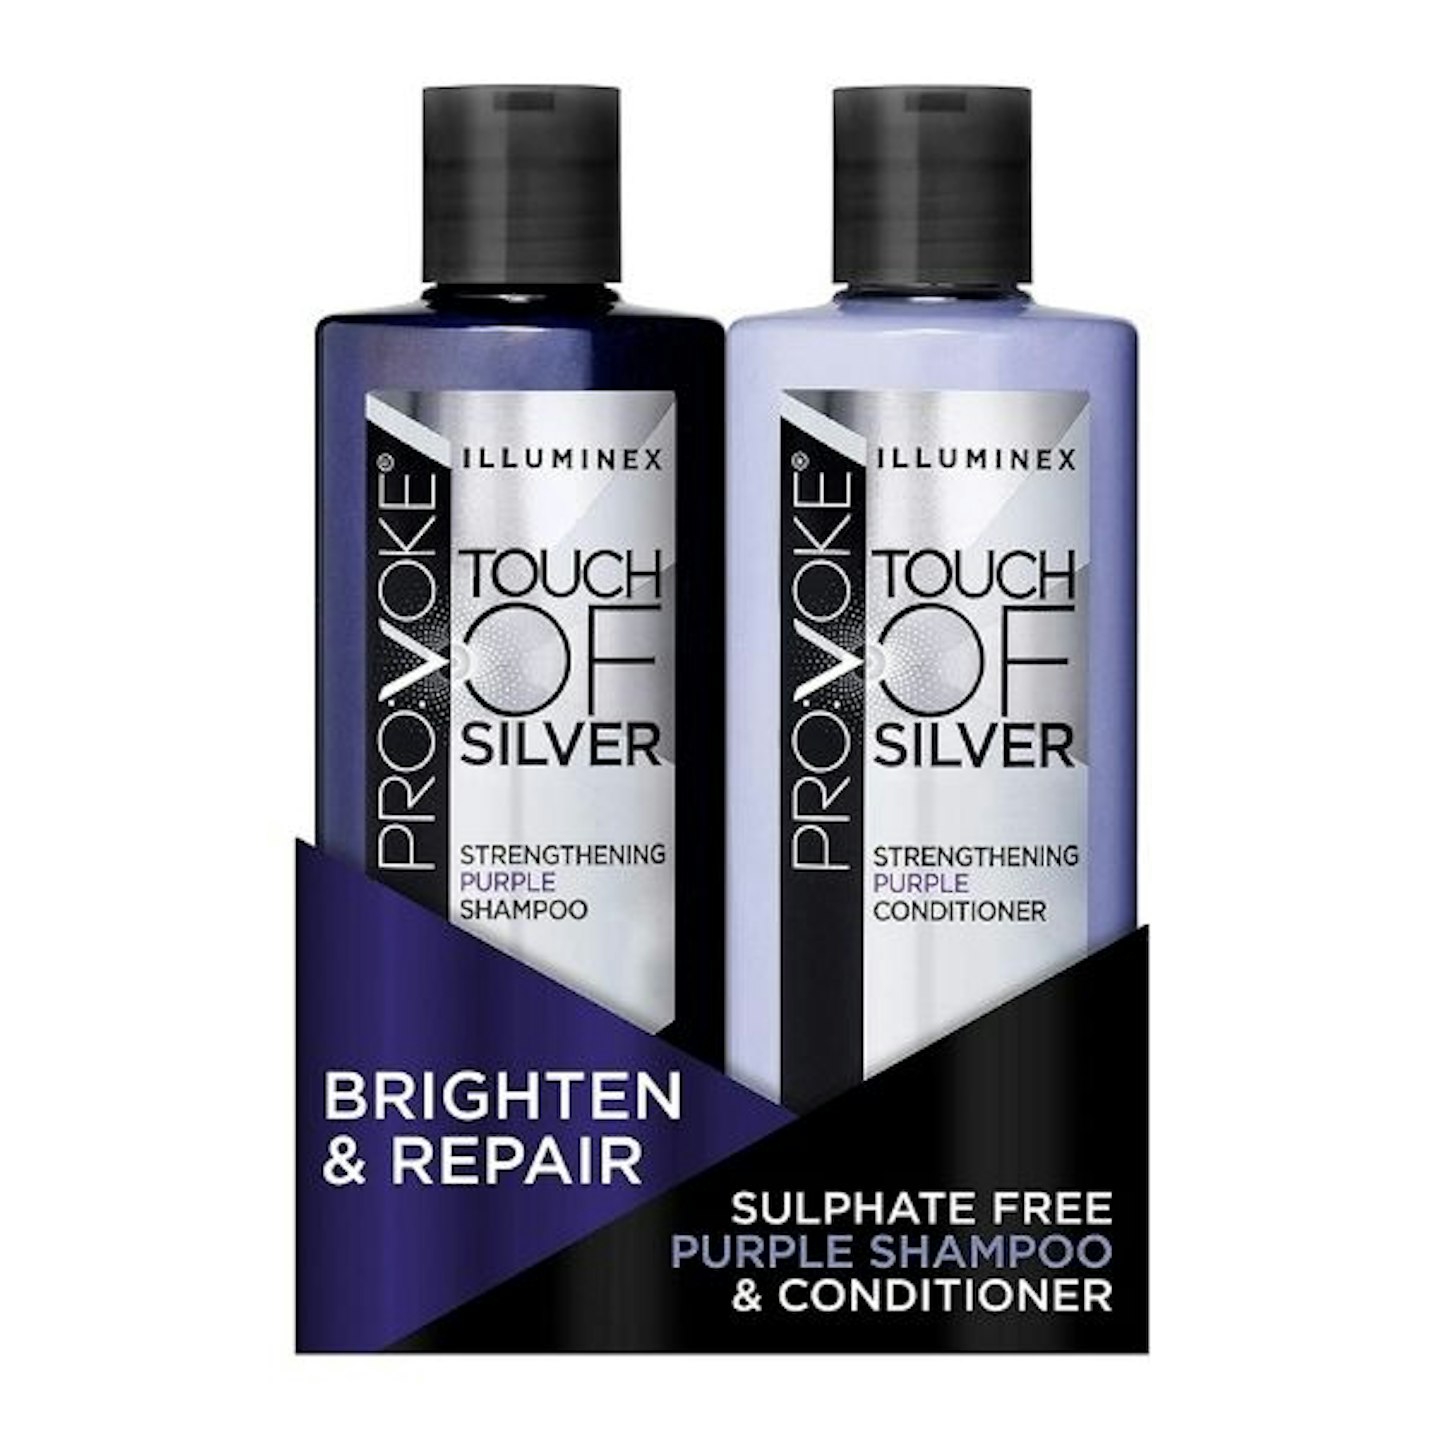 PRO:VOKE Illuminex Touch of Silver Strengthening Purple Shampoo and Conditioner